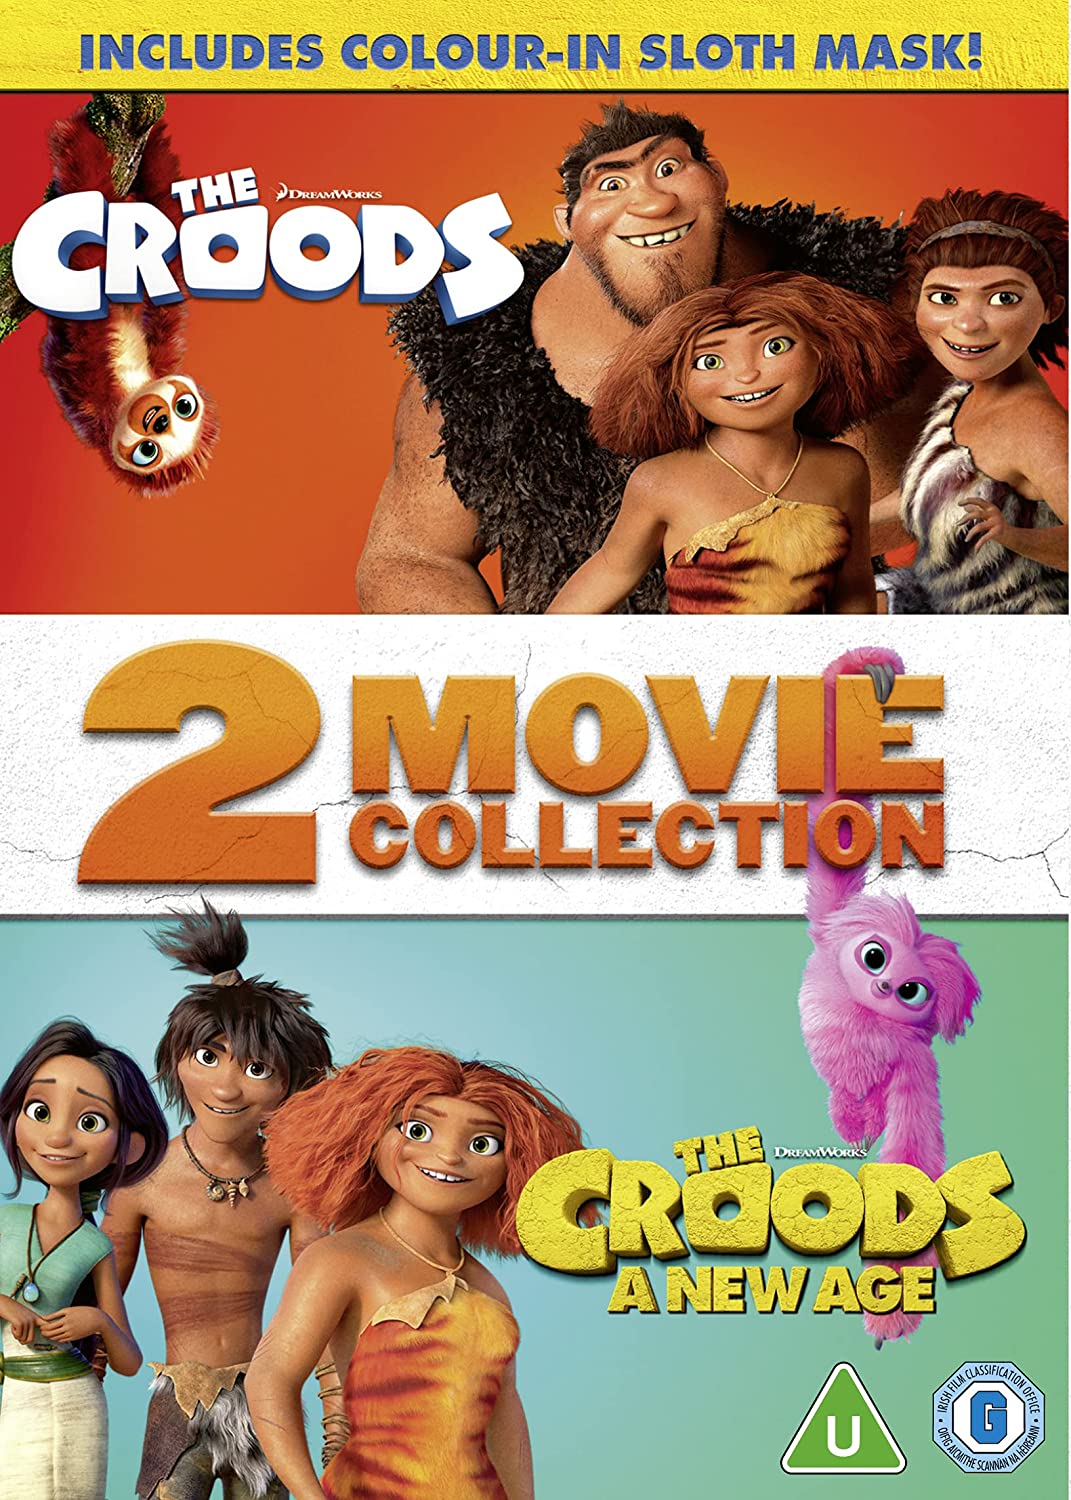 The Croods 1 & 2 (Includes Colour-In Sloth Mask) [2021] [DVD]